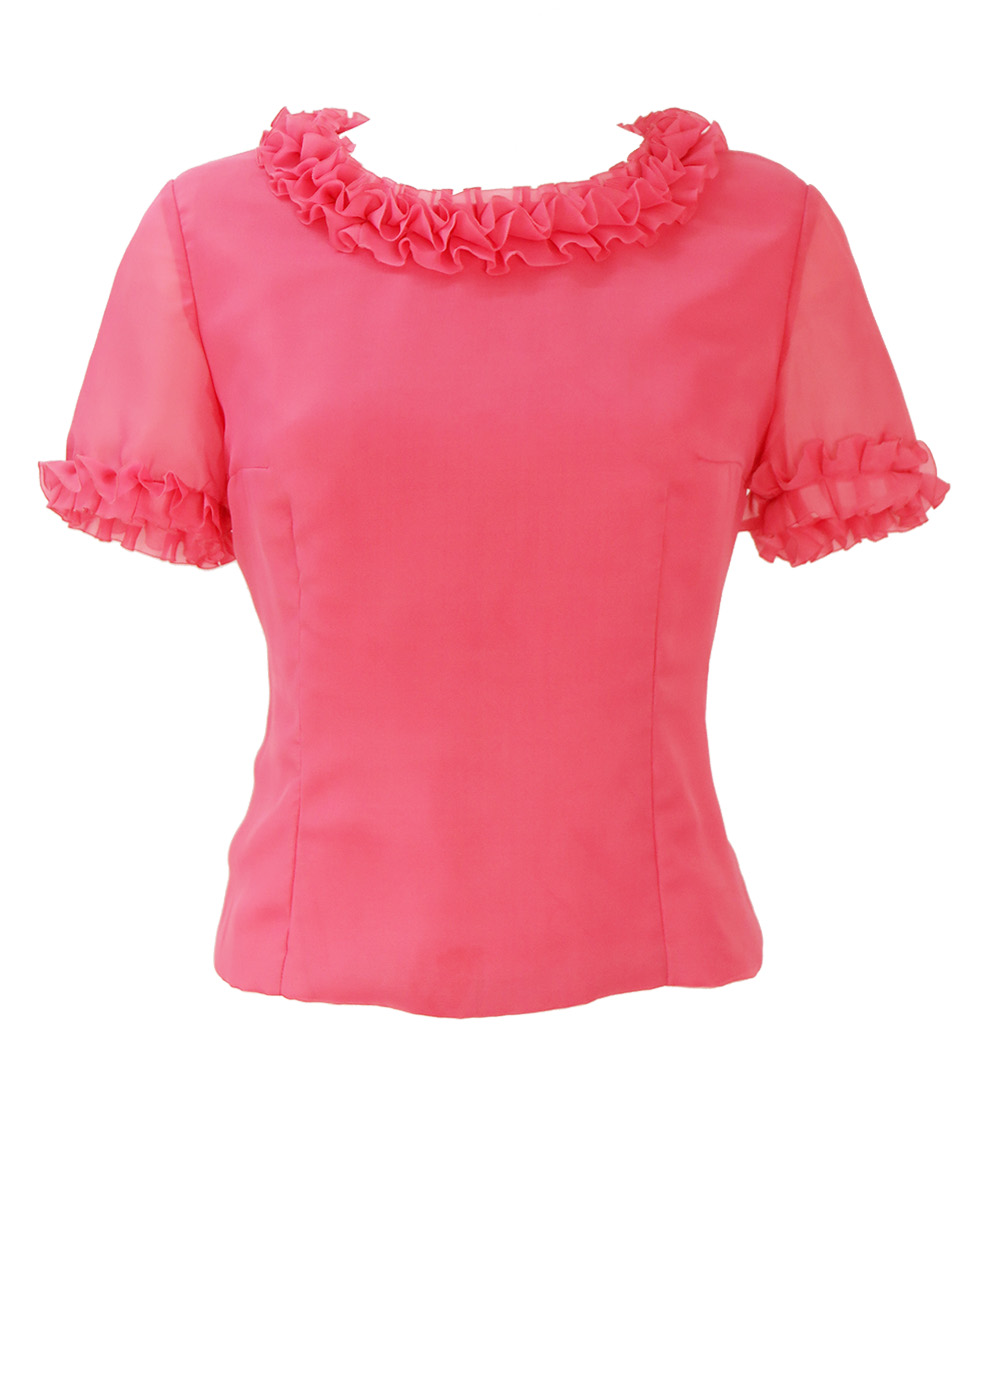 Vintage 60's Short Sleeved Pink Top with Frill Neckline and Sleeves - M ...